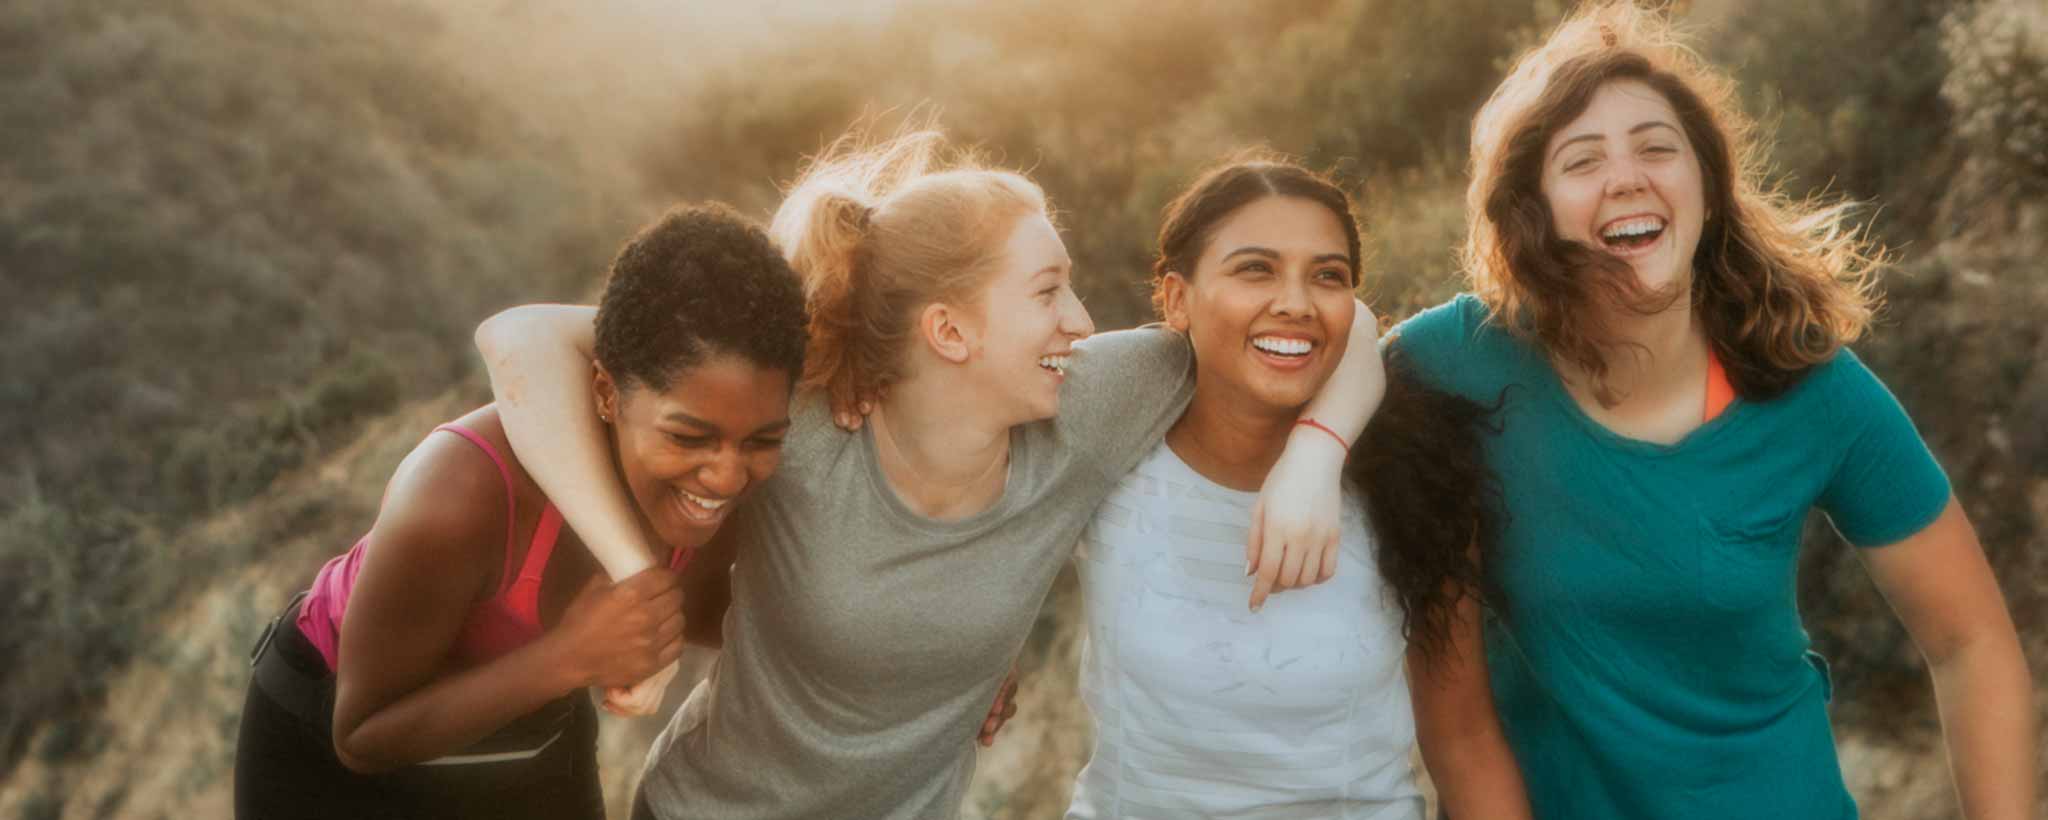 'Four smiling women hiking in hills'